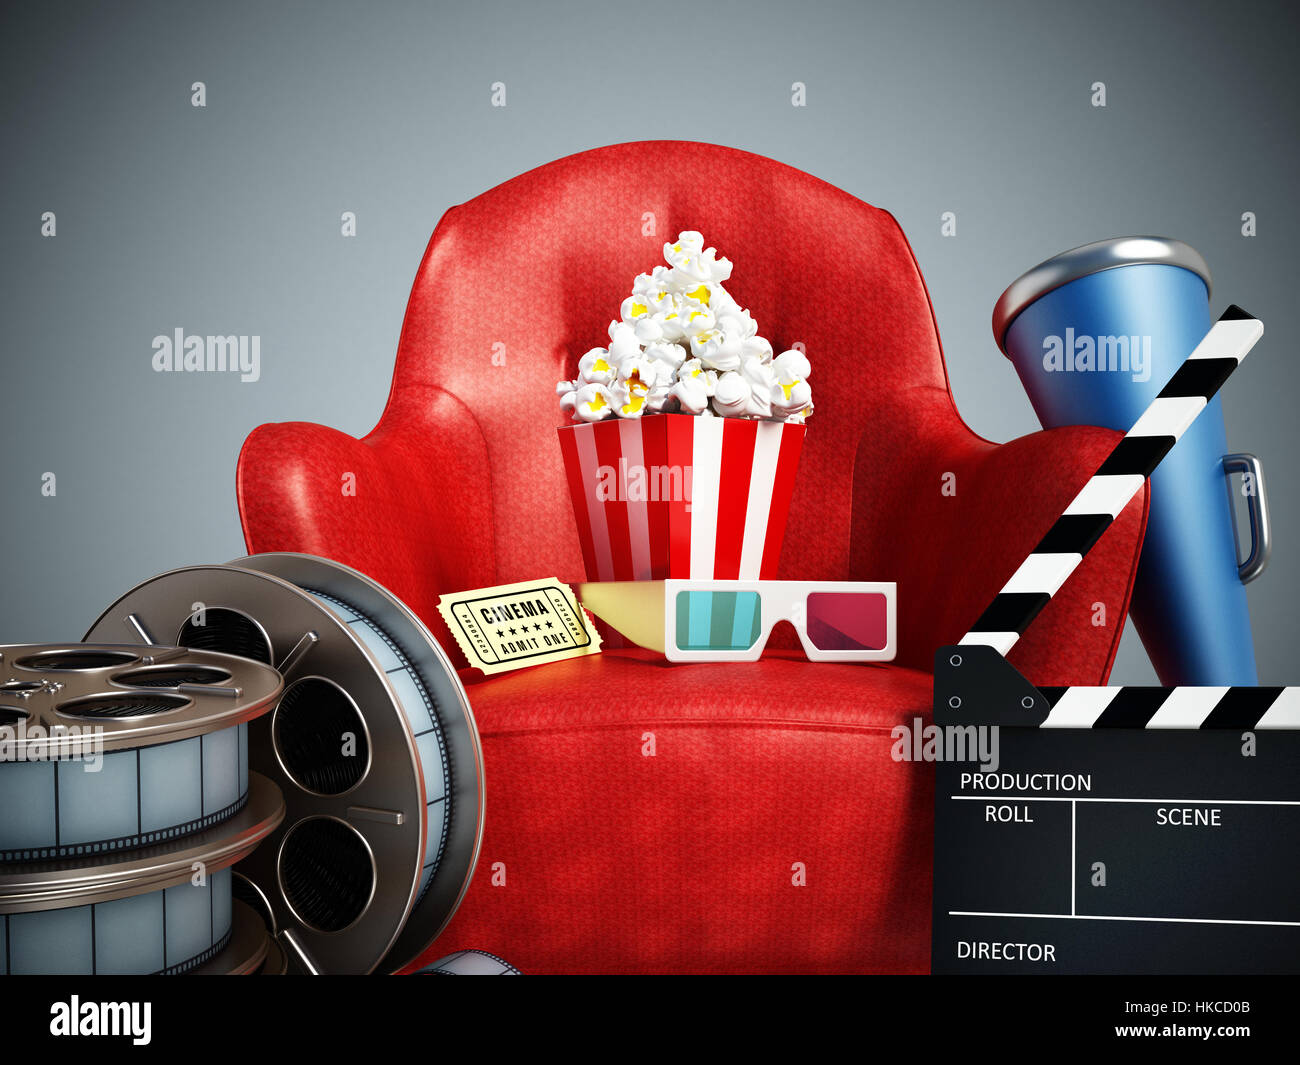 Red seat, pop corn, ticket, film reel and slate. 3D illustration Stock Photo